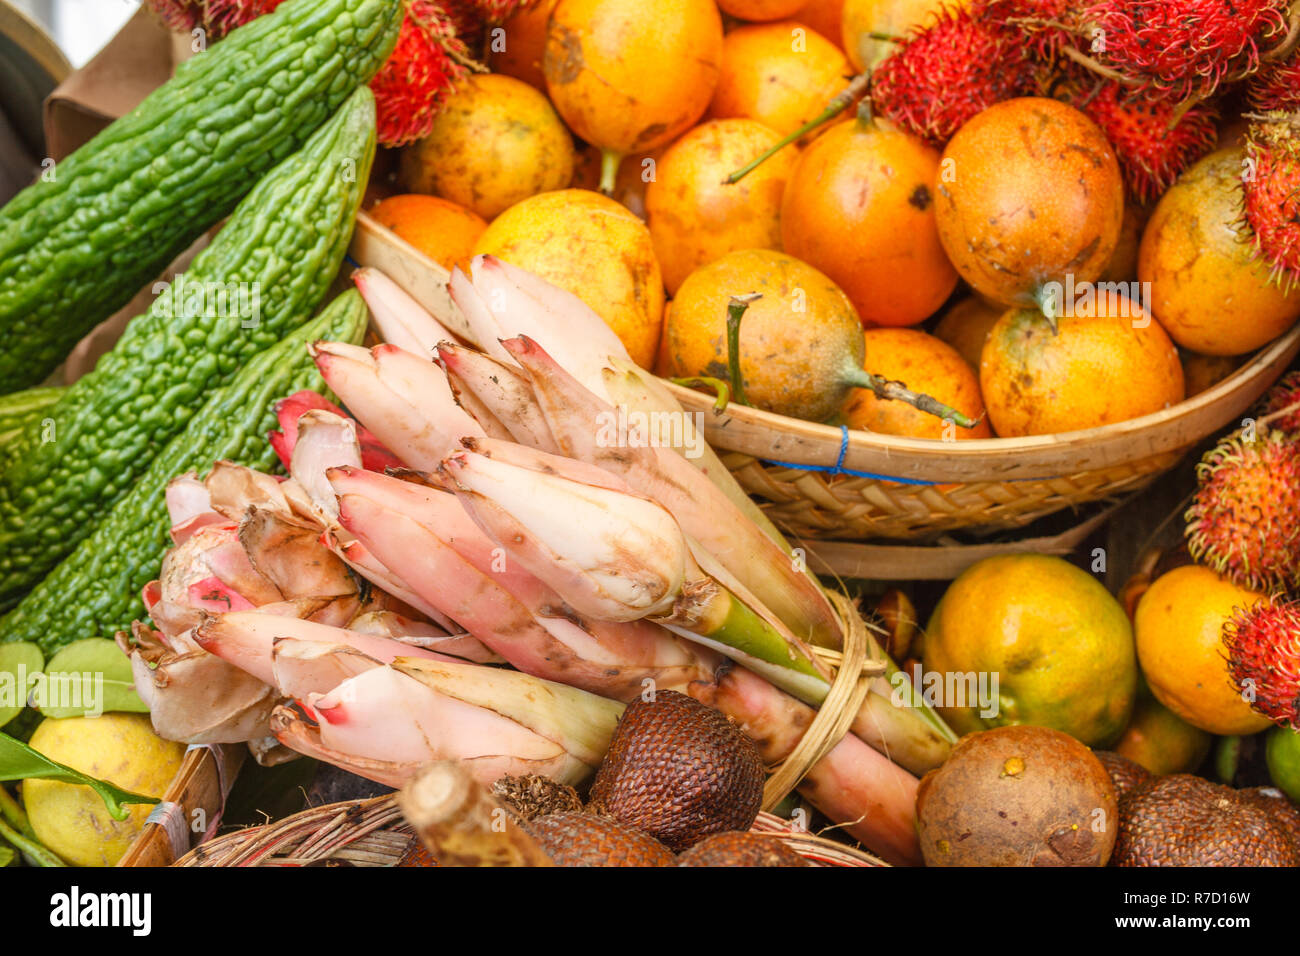 Yellow passion fruit, rambutans and banana flowers at a traditional farmers market, Bali, Indonesia. Stock Photo